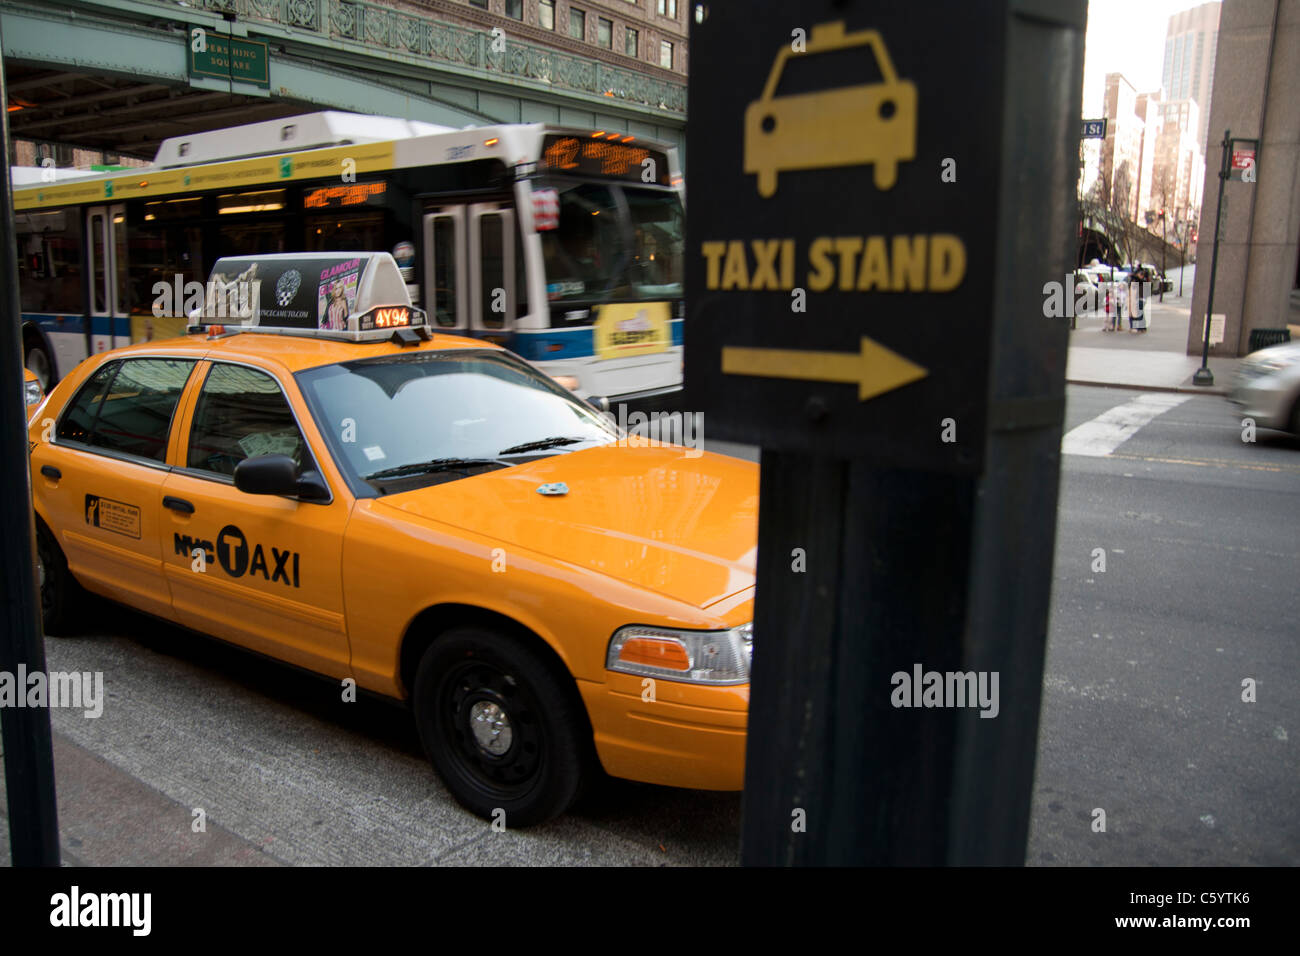 New York taxi stand Stock Photo - Alamy